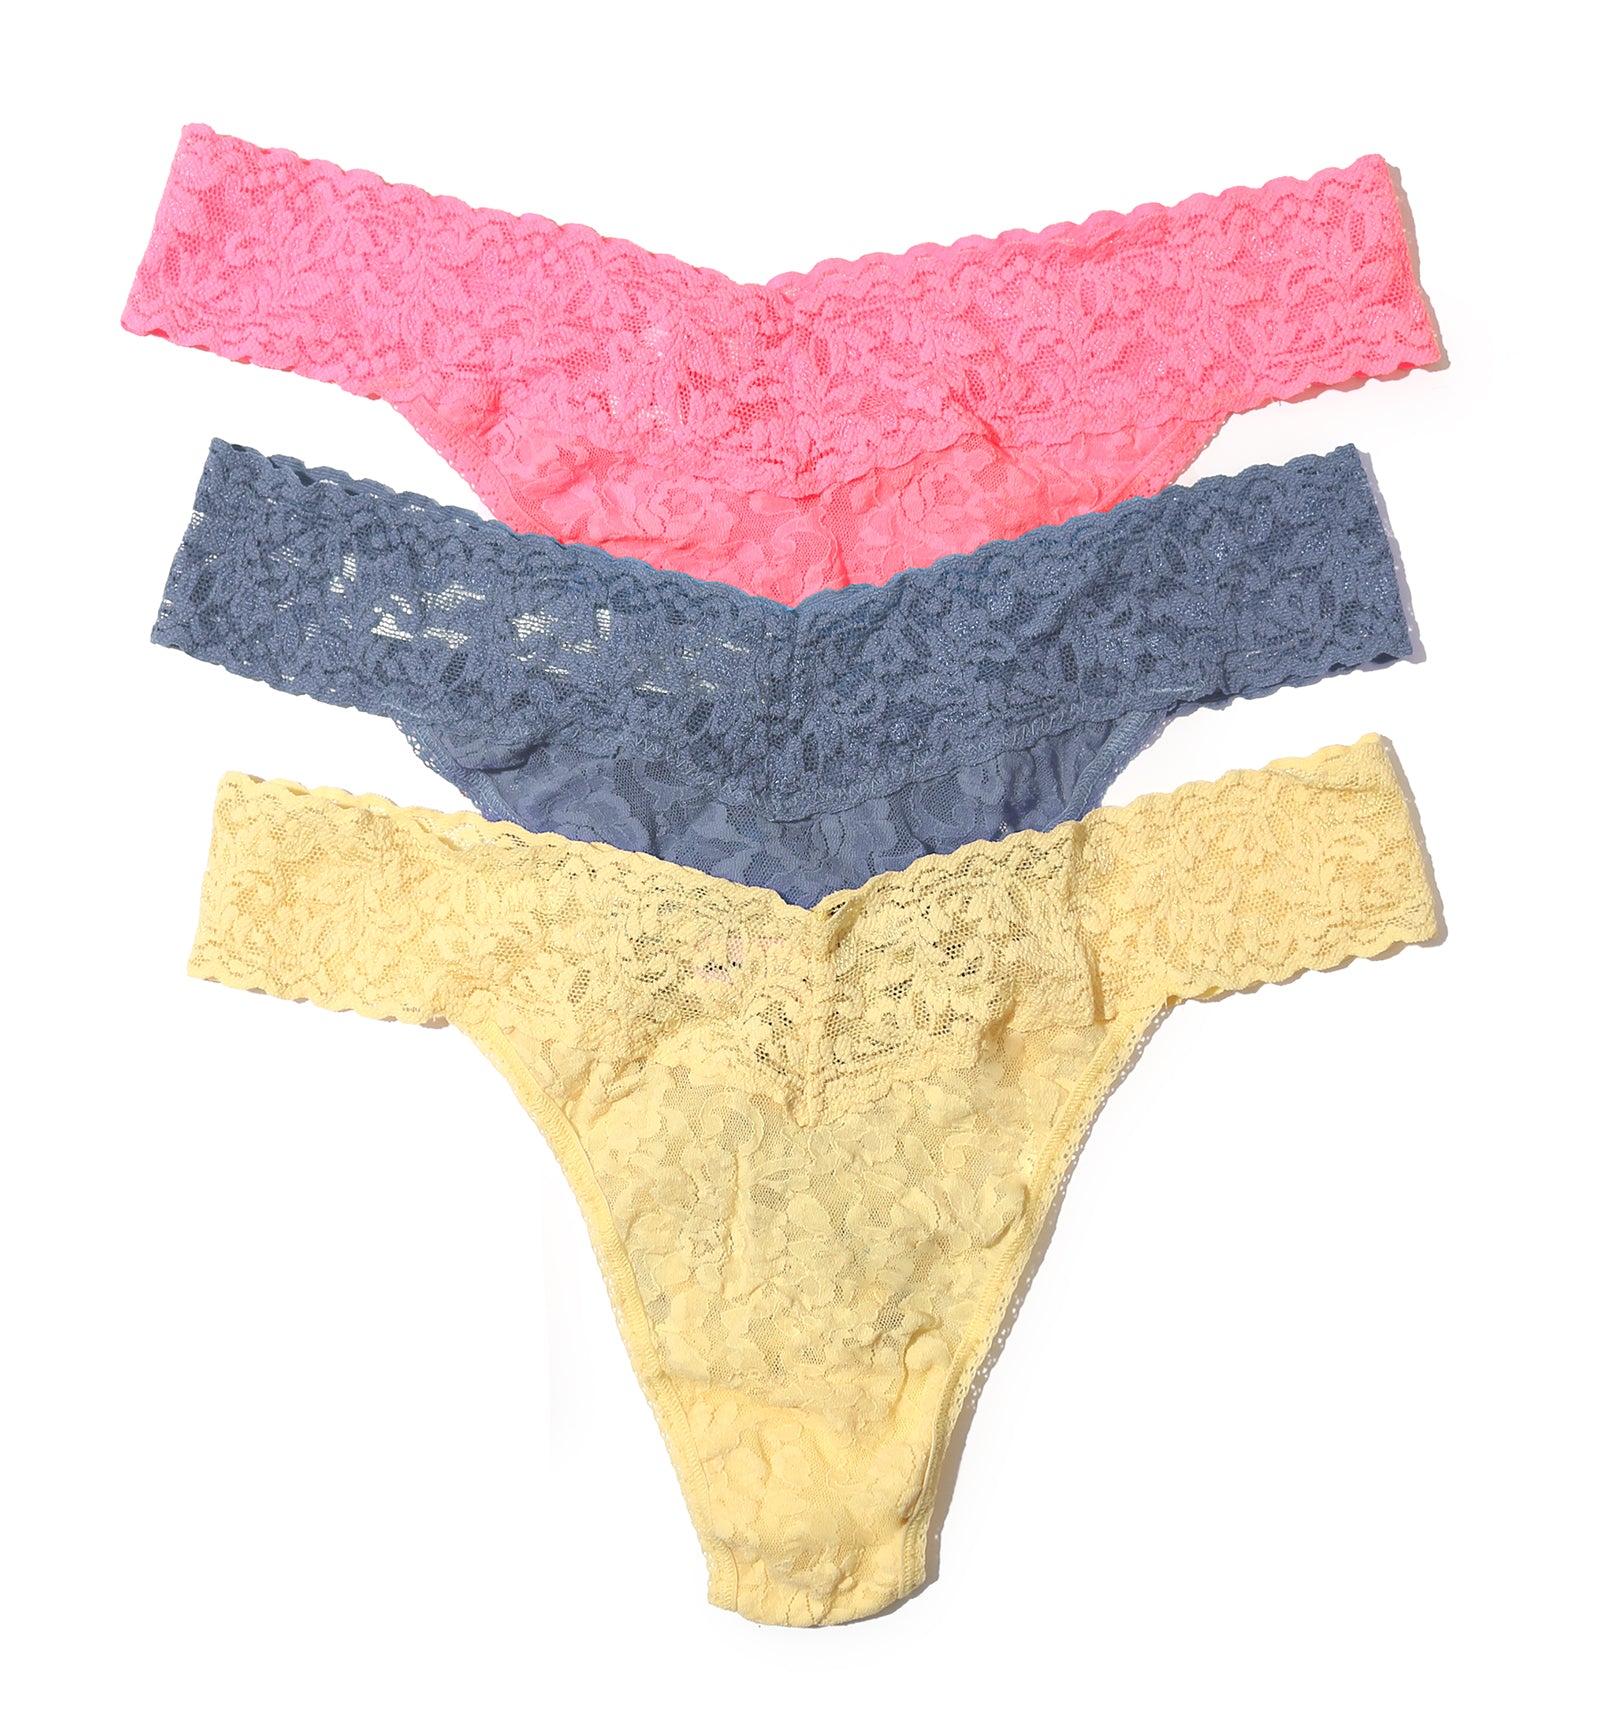 Hanky Panky 3-PACK Signature Lace Original Rise Thong (48113PK),Hello Spring - Hello Spring,One Size